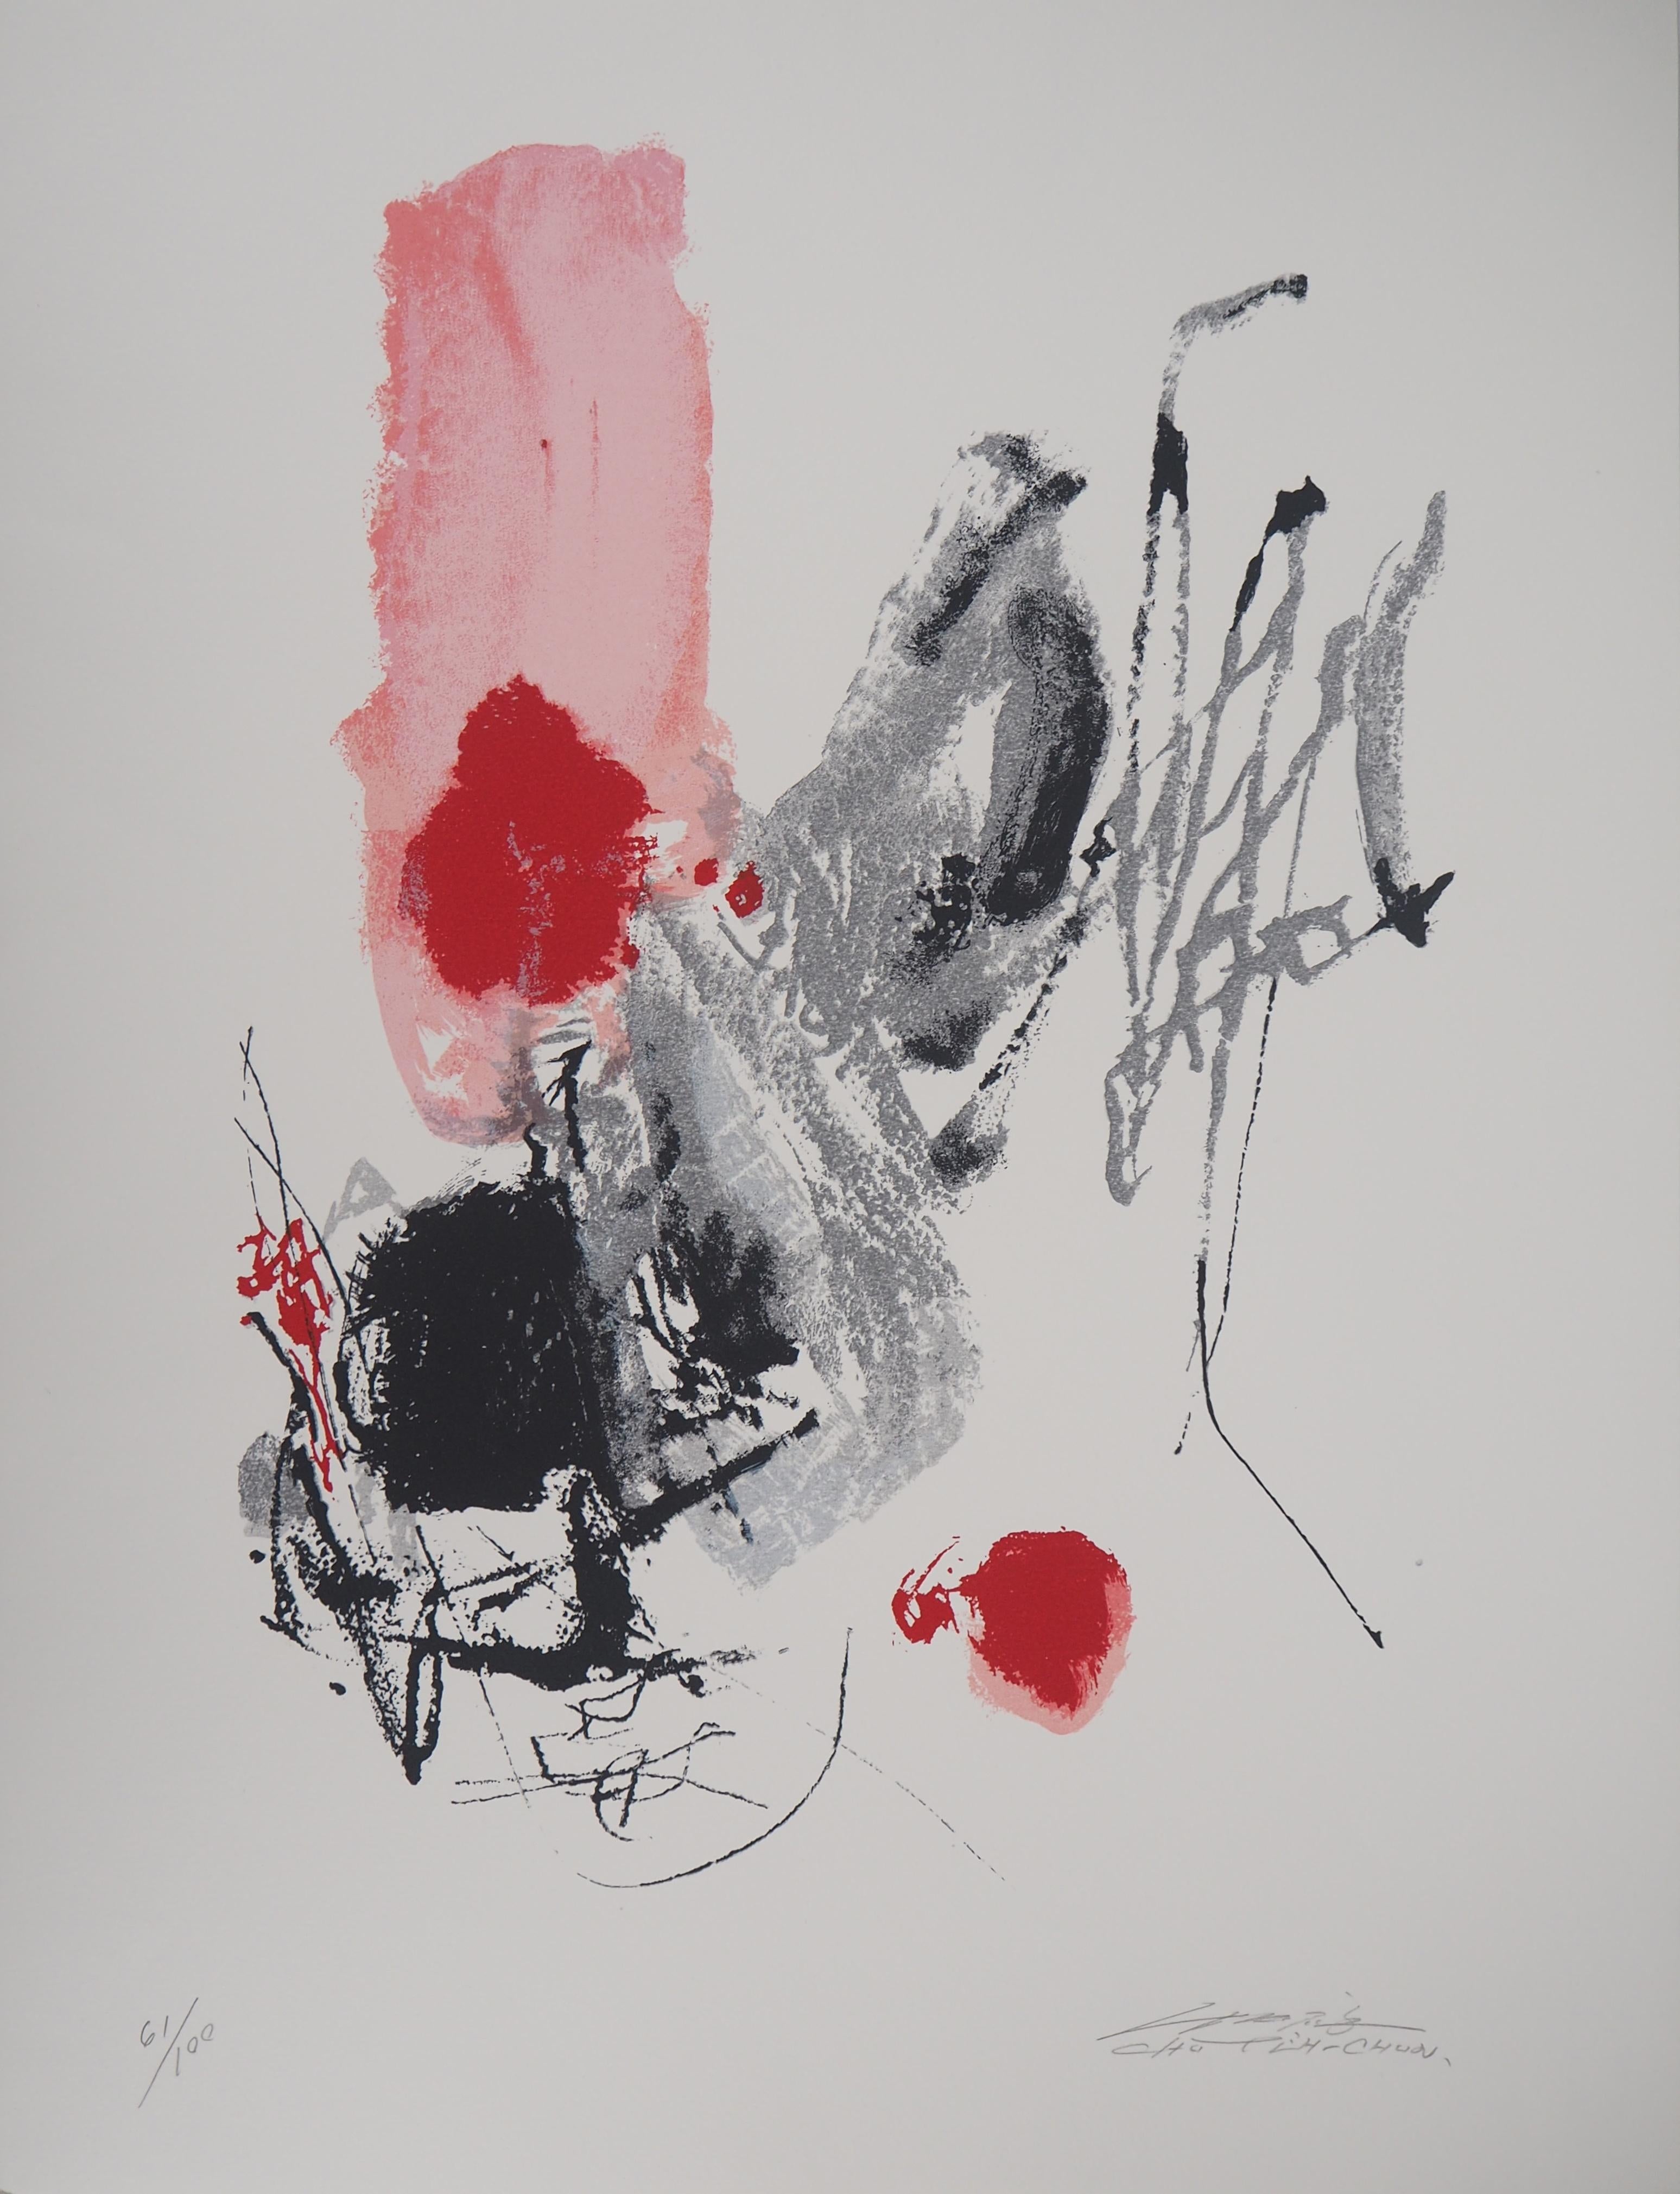 Chu Teh-Chun Abstract Print - Composition in Red and Black - Original Lithograph, Handsigned - Ltd 100